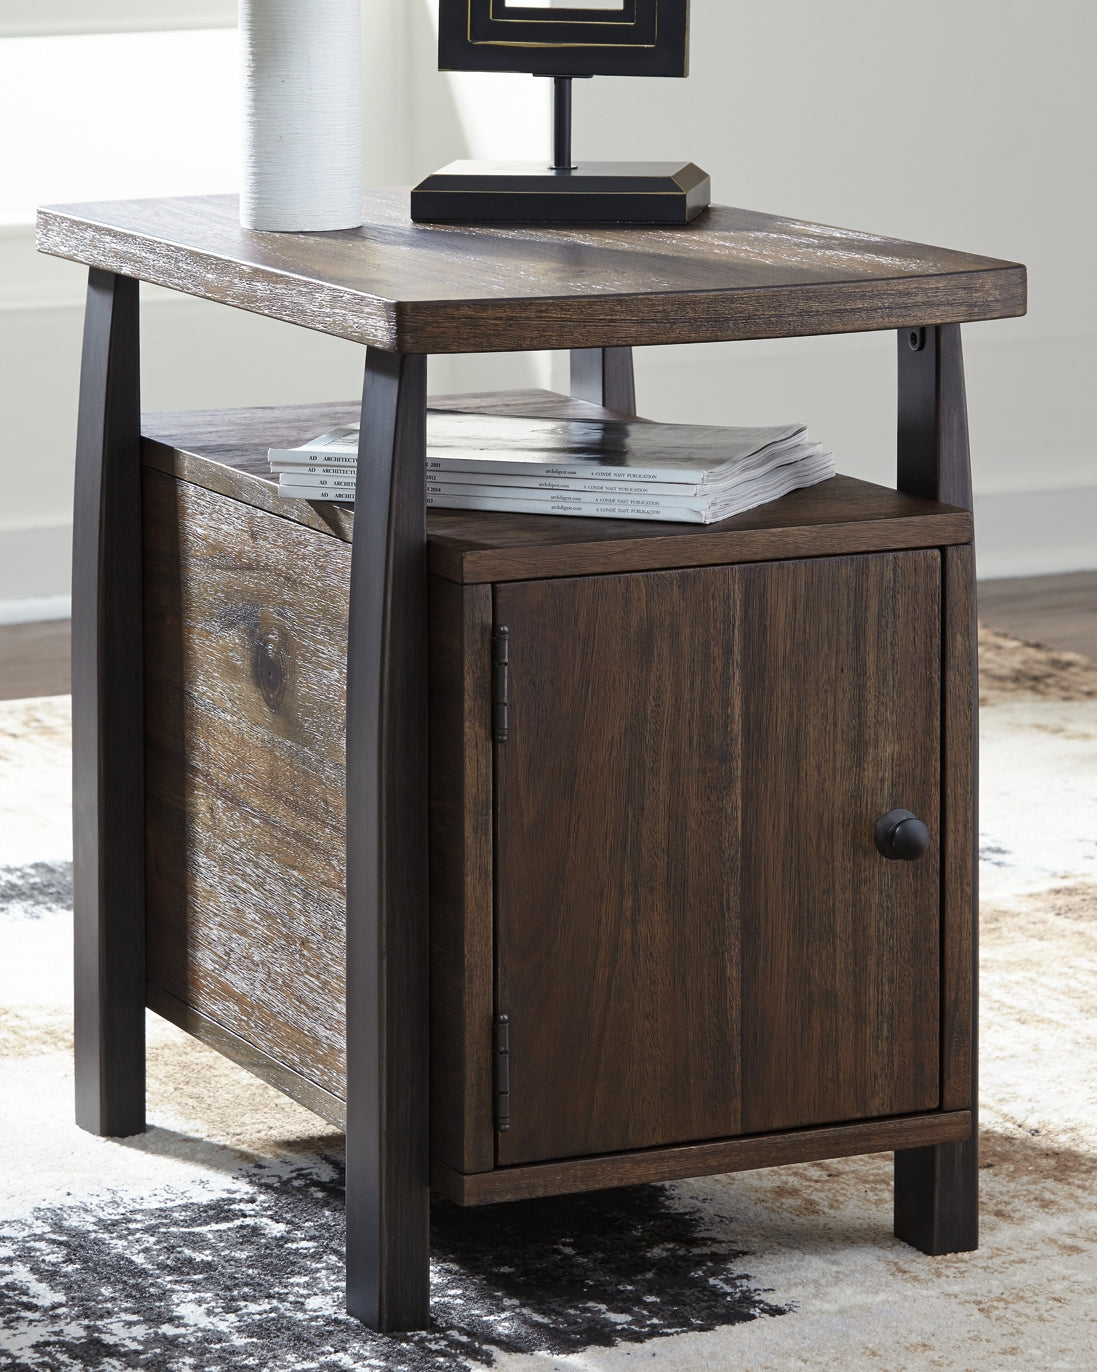 Ashley Express - Vailbry Chair Side End Table Wilson Furniture (OH)  in Bridgeport, Ohio. Serving Bridgeport, Yorkville, Bellaire, & Avondale